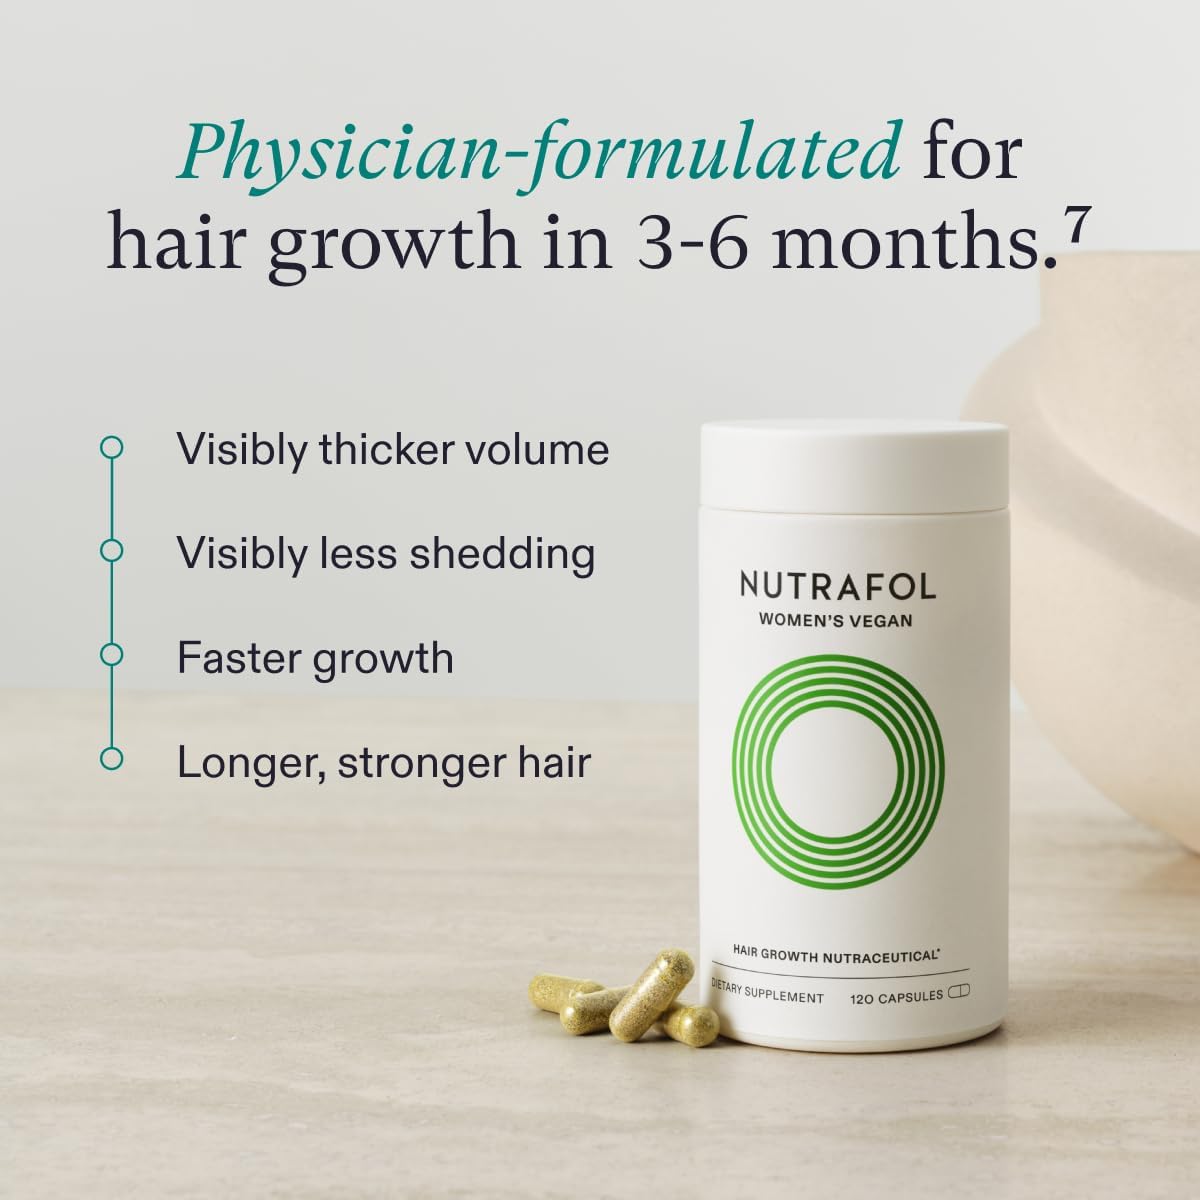 Nutrafol Women's Vegan Hair Growth Supplements, Plant-based, Ages 18-44 - Dermatologist Recommended - 3 Month Suppl